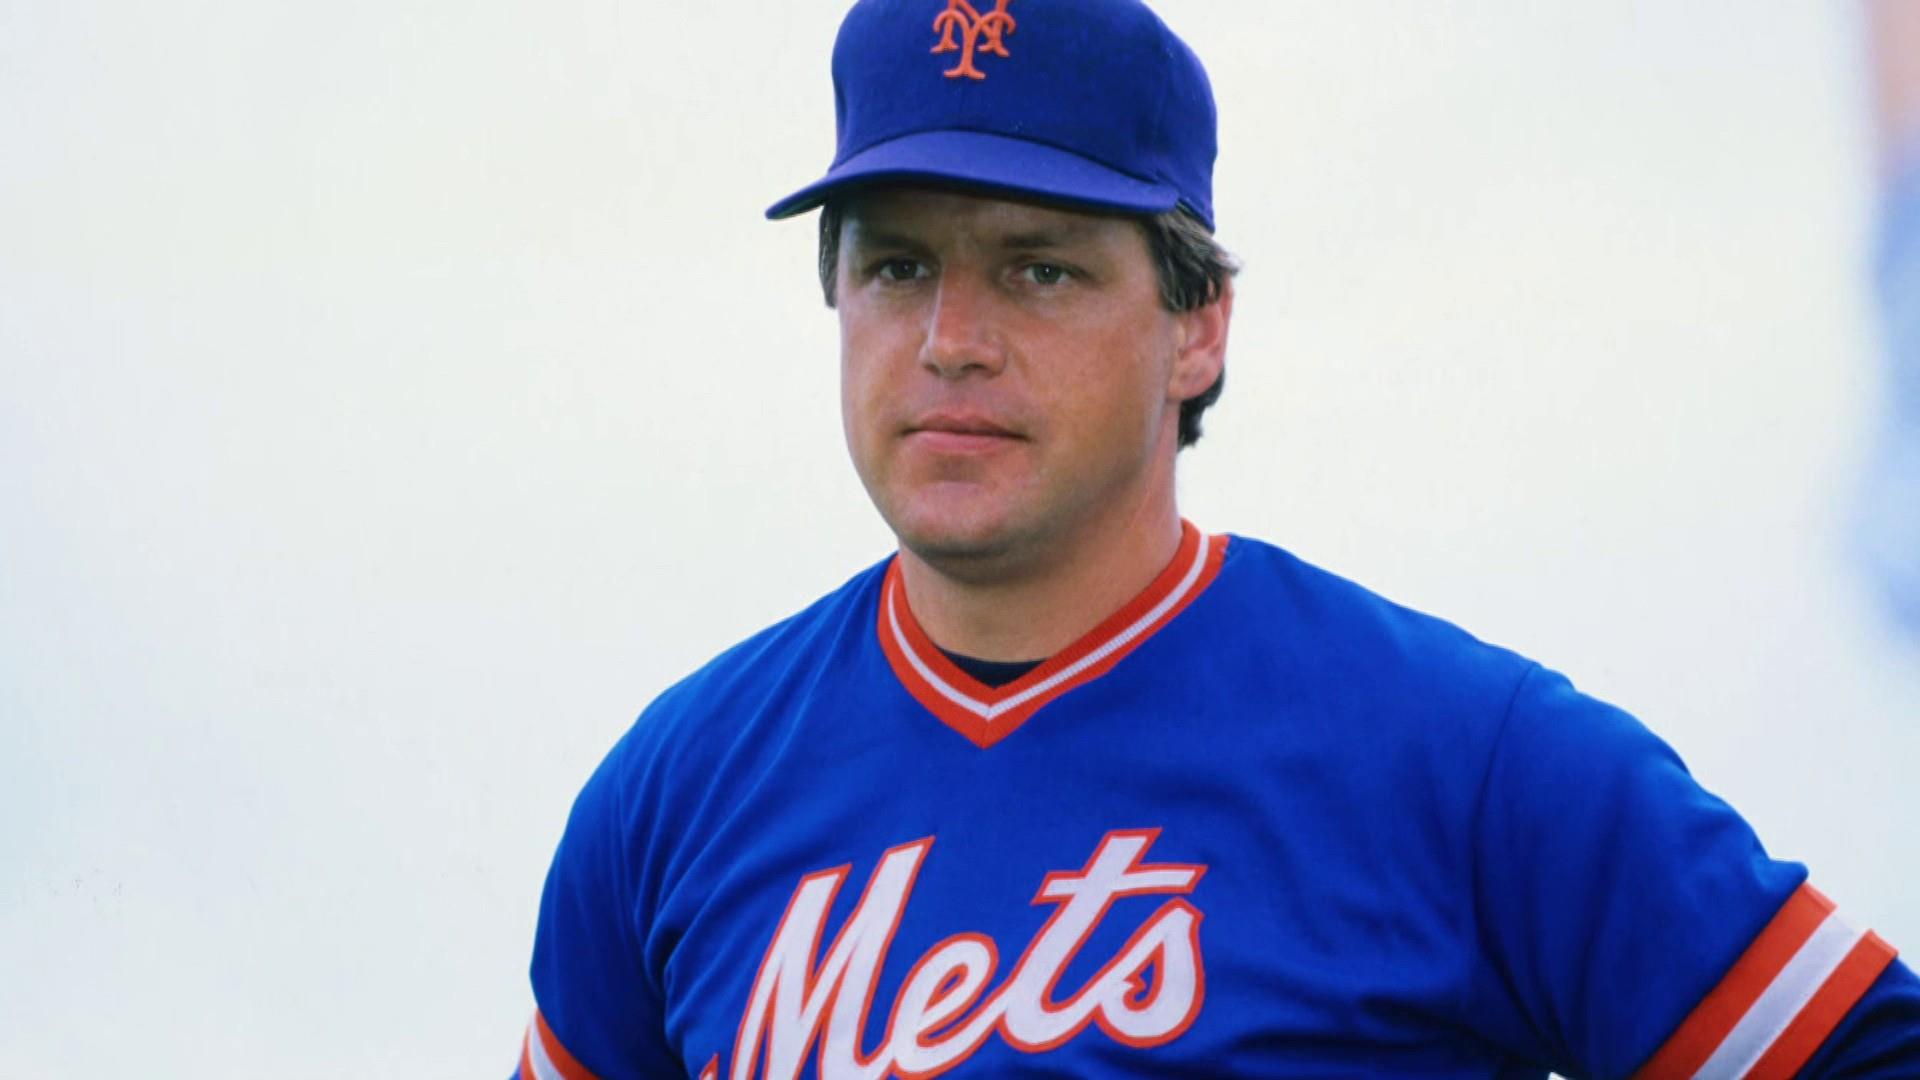 Tom Seaver, Hall of Fame pitcher and New York Mets icon, dies at 75